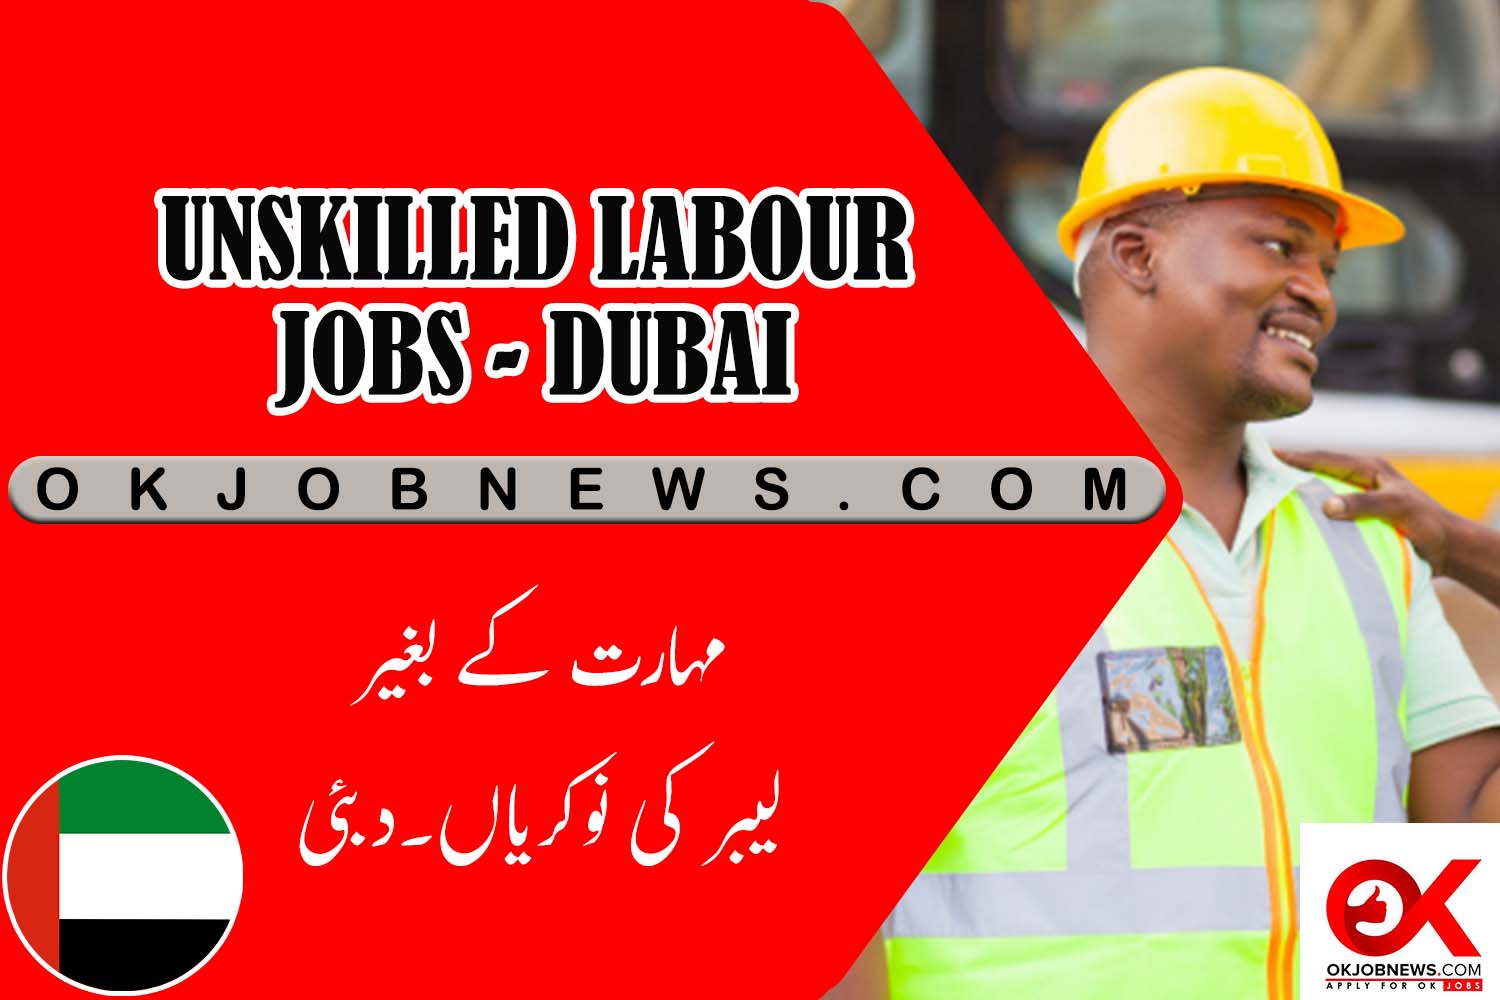 Unskilled Labour Jobs in Dubai What You Need to Know